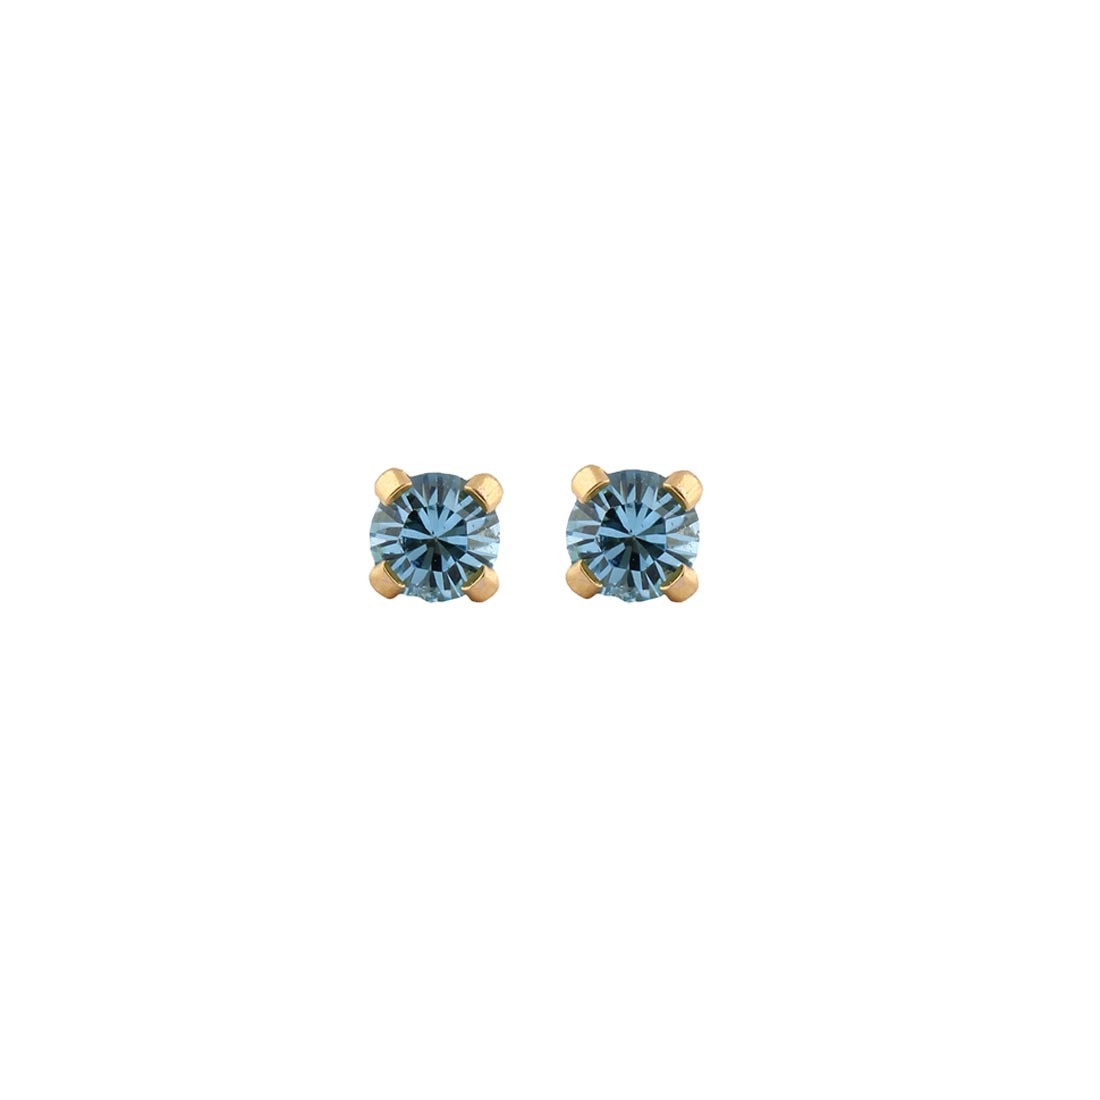 3MM - March Aquamarine Birthstone (Round) - Blue | 24K Gold Plated Kids / Baby / Children’s Fashion Earrings | Studex Tiny Tips